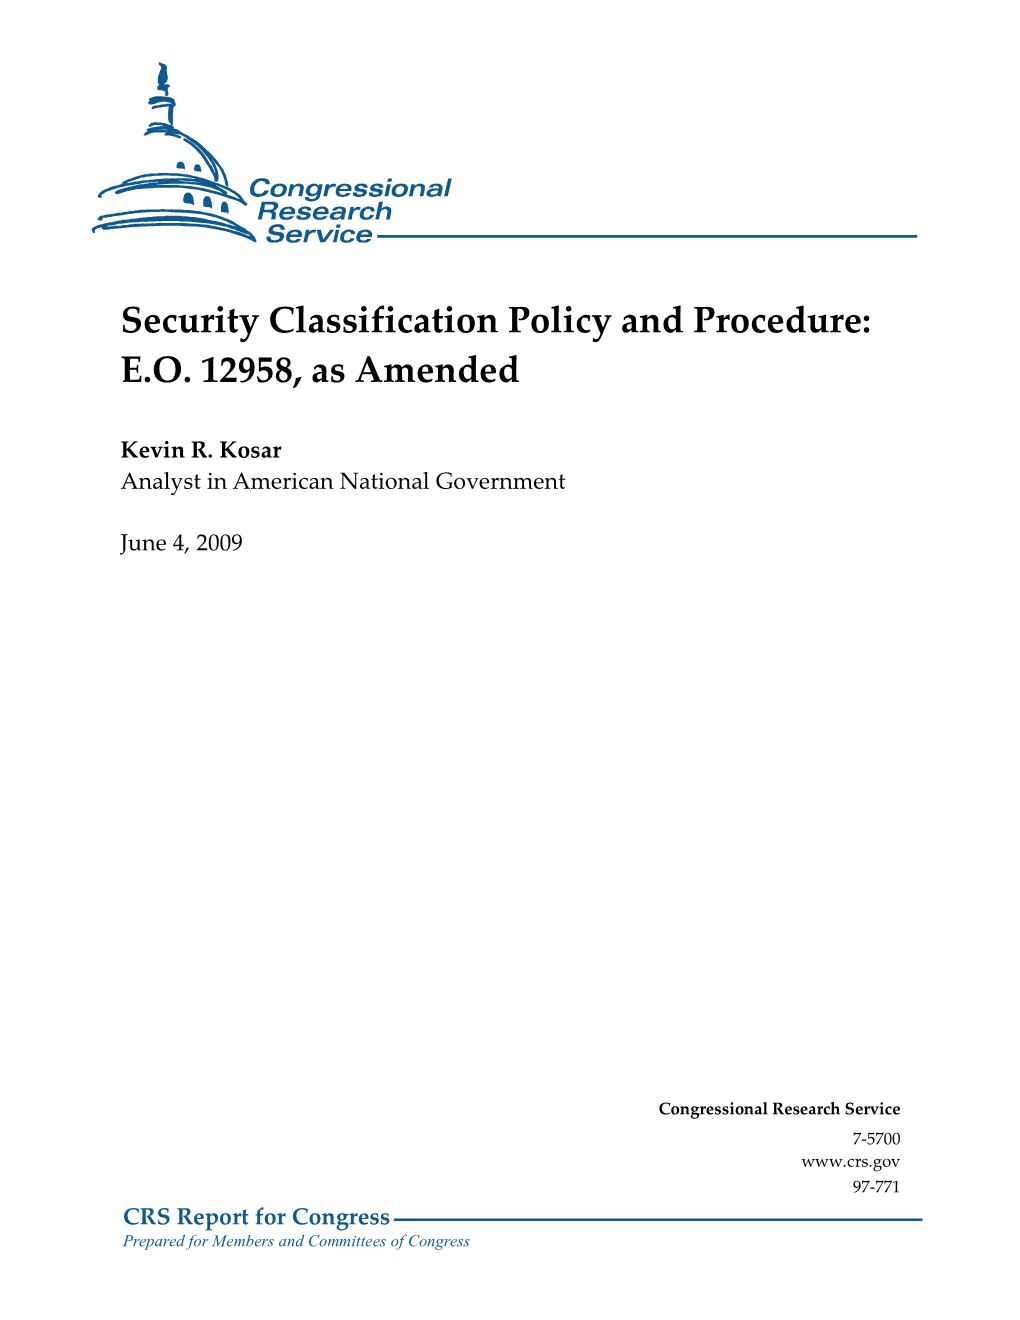 Security Classification Policy and Procedure: E.O. 12958, As Amended